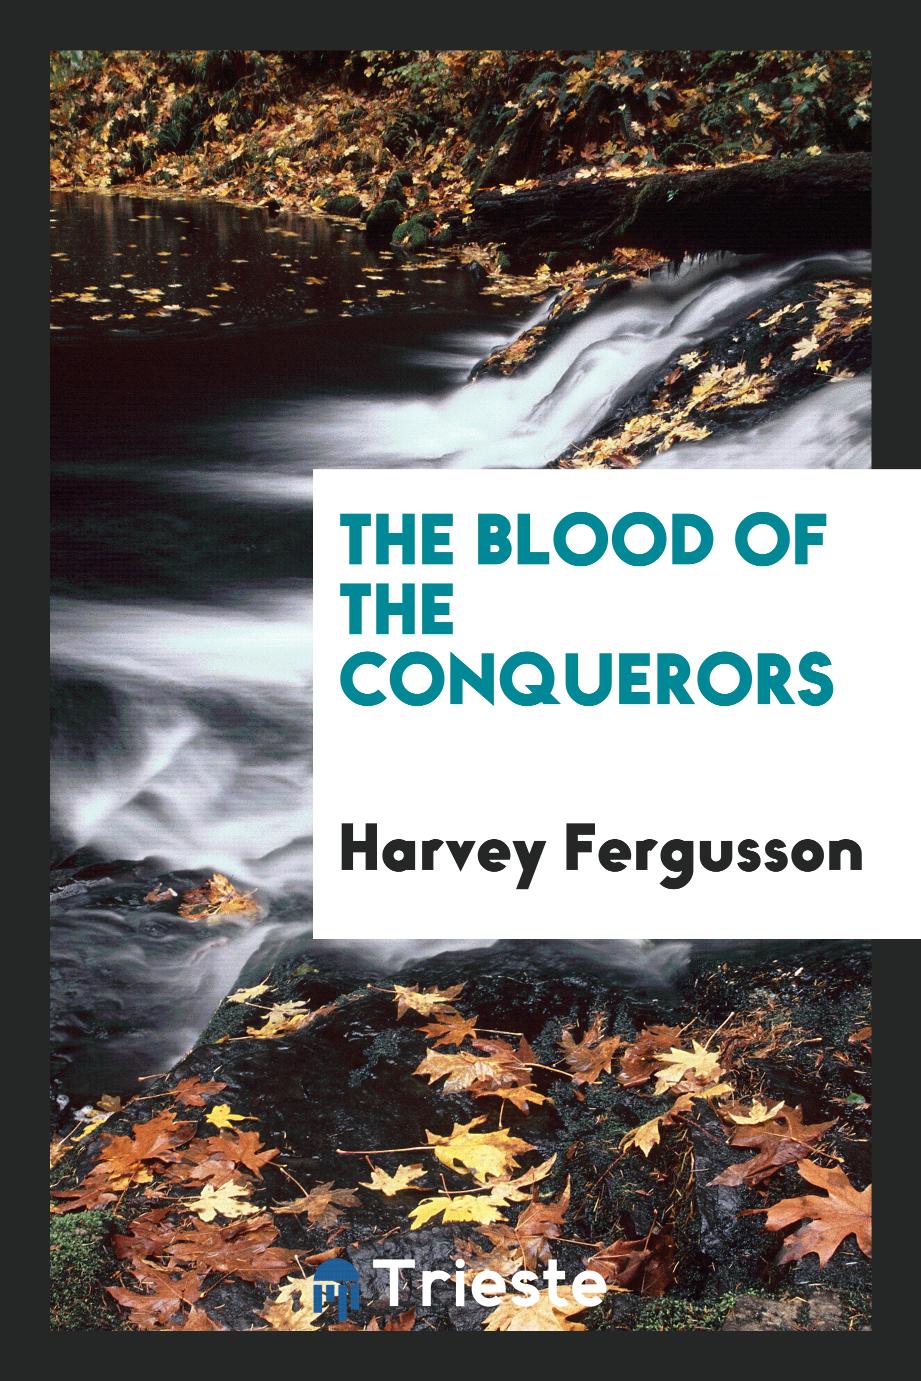 The blood of the conquerors